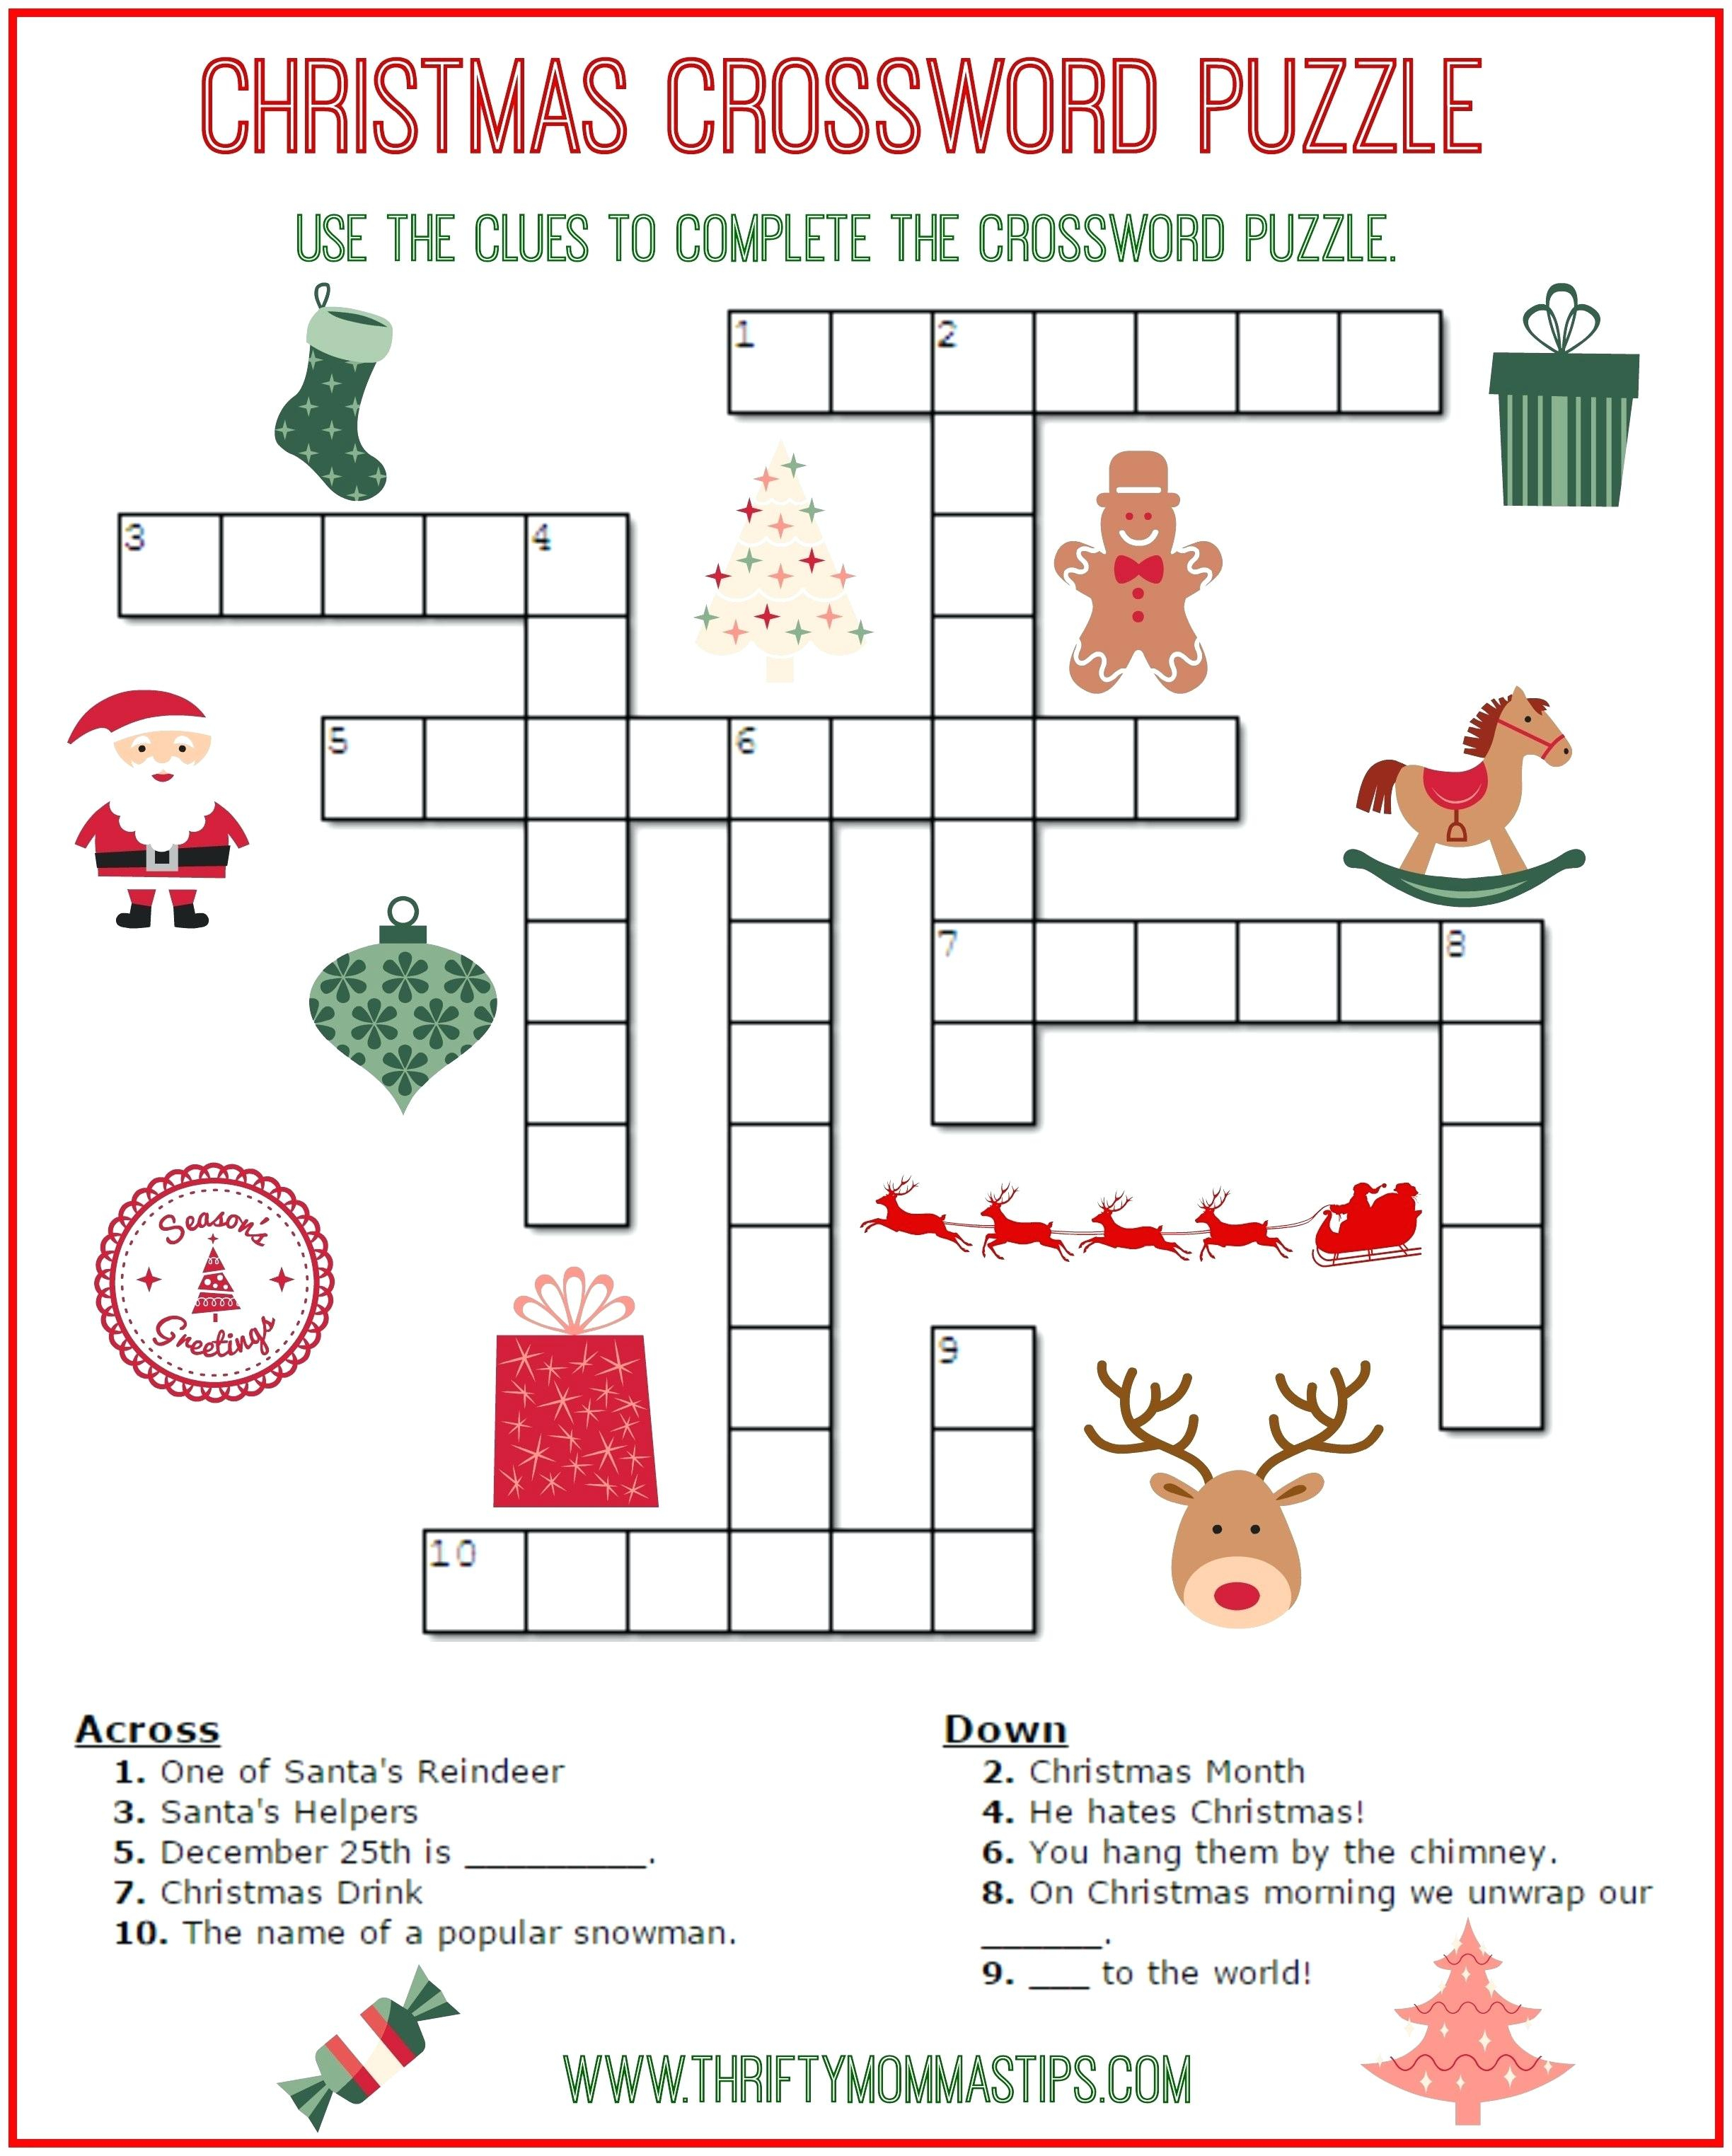 Free Printable Crossword Puzzles For Kids State Capitals Crossword - Printable Crossword Puzzles Grade 6